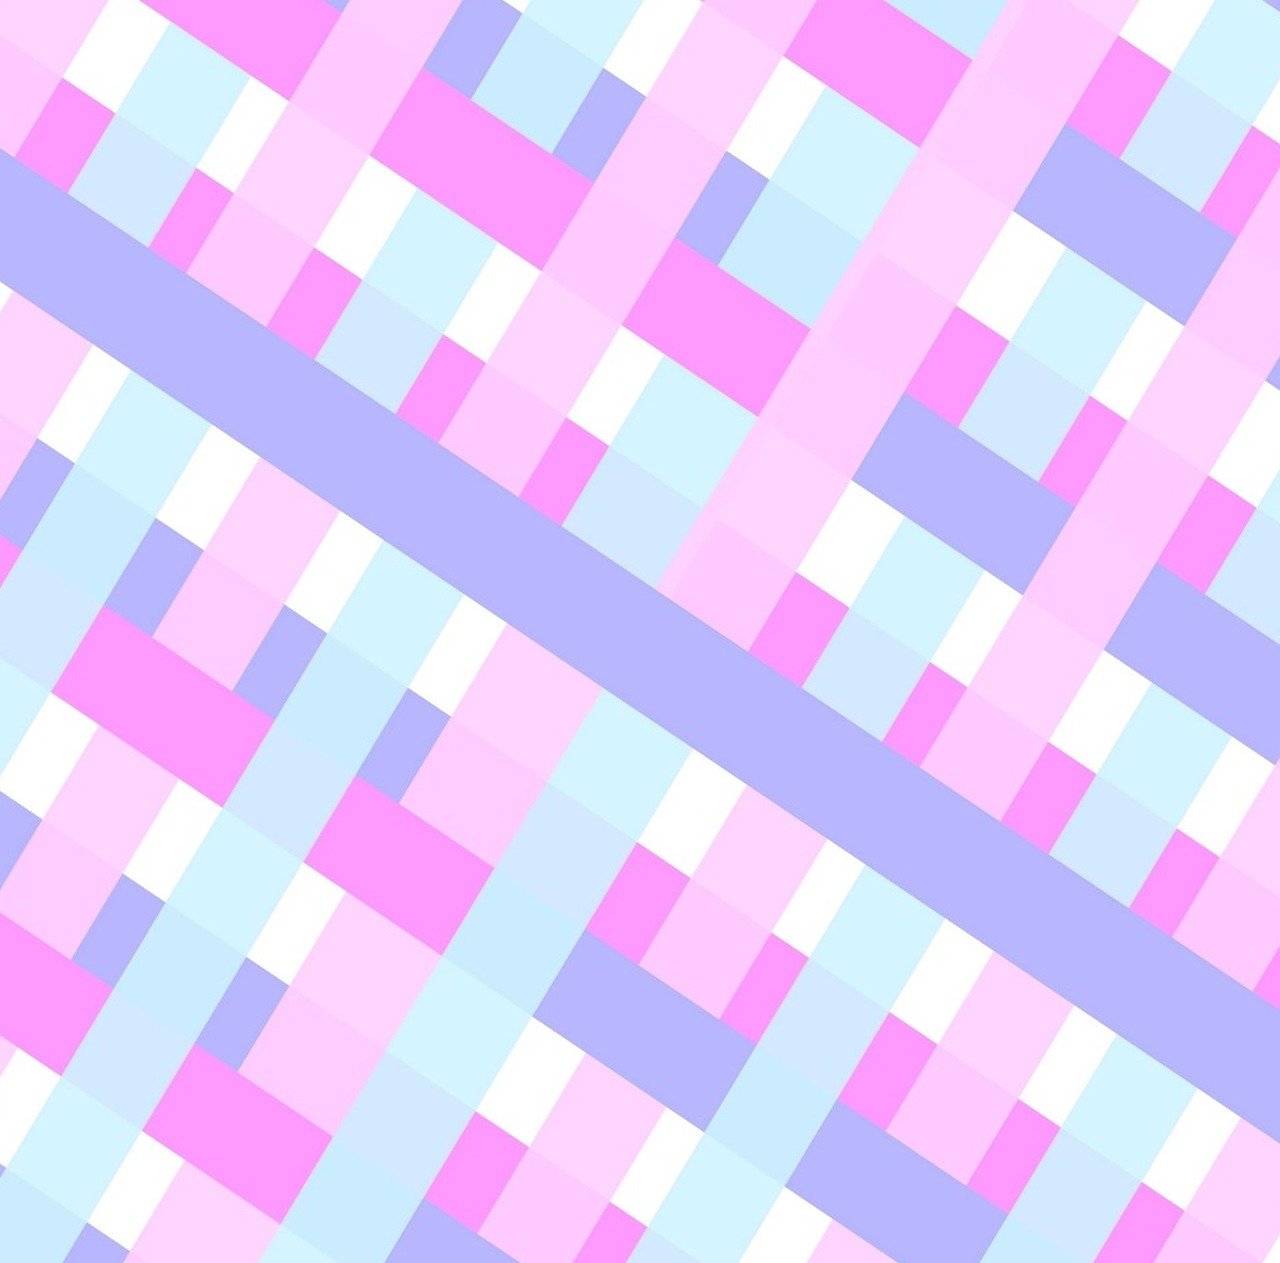 a pattern of pink, blue, and white squares, a digital rendering, inspired by Alfred Manessier, tumblr, diagonal, twins, pastel purple background, stylized material bssrdf